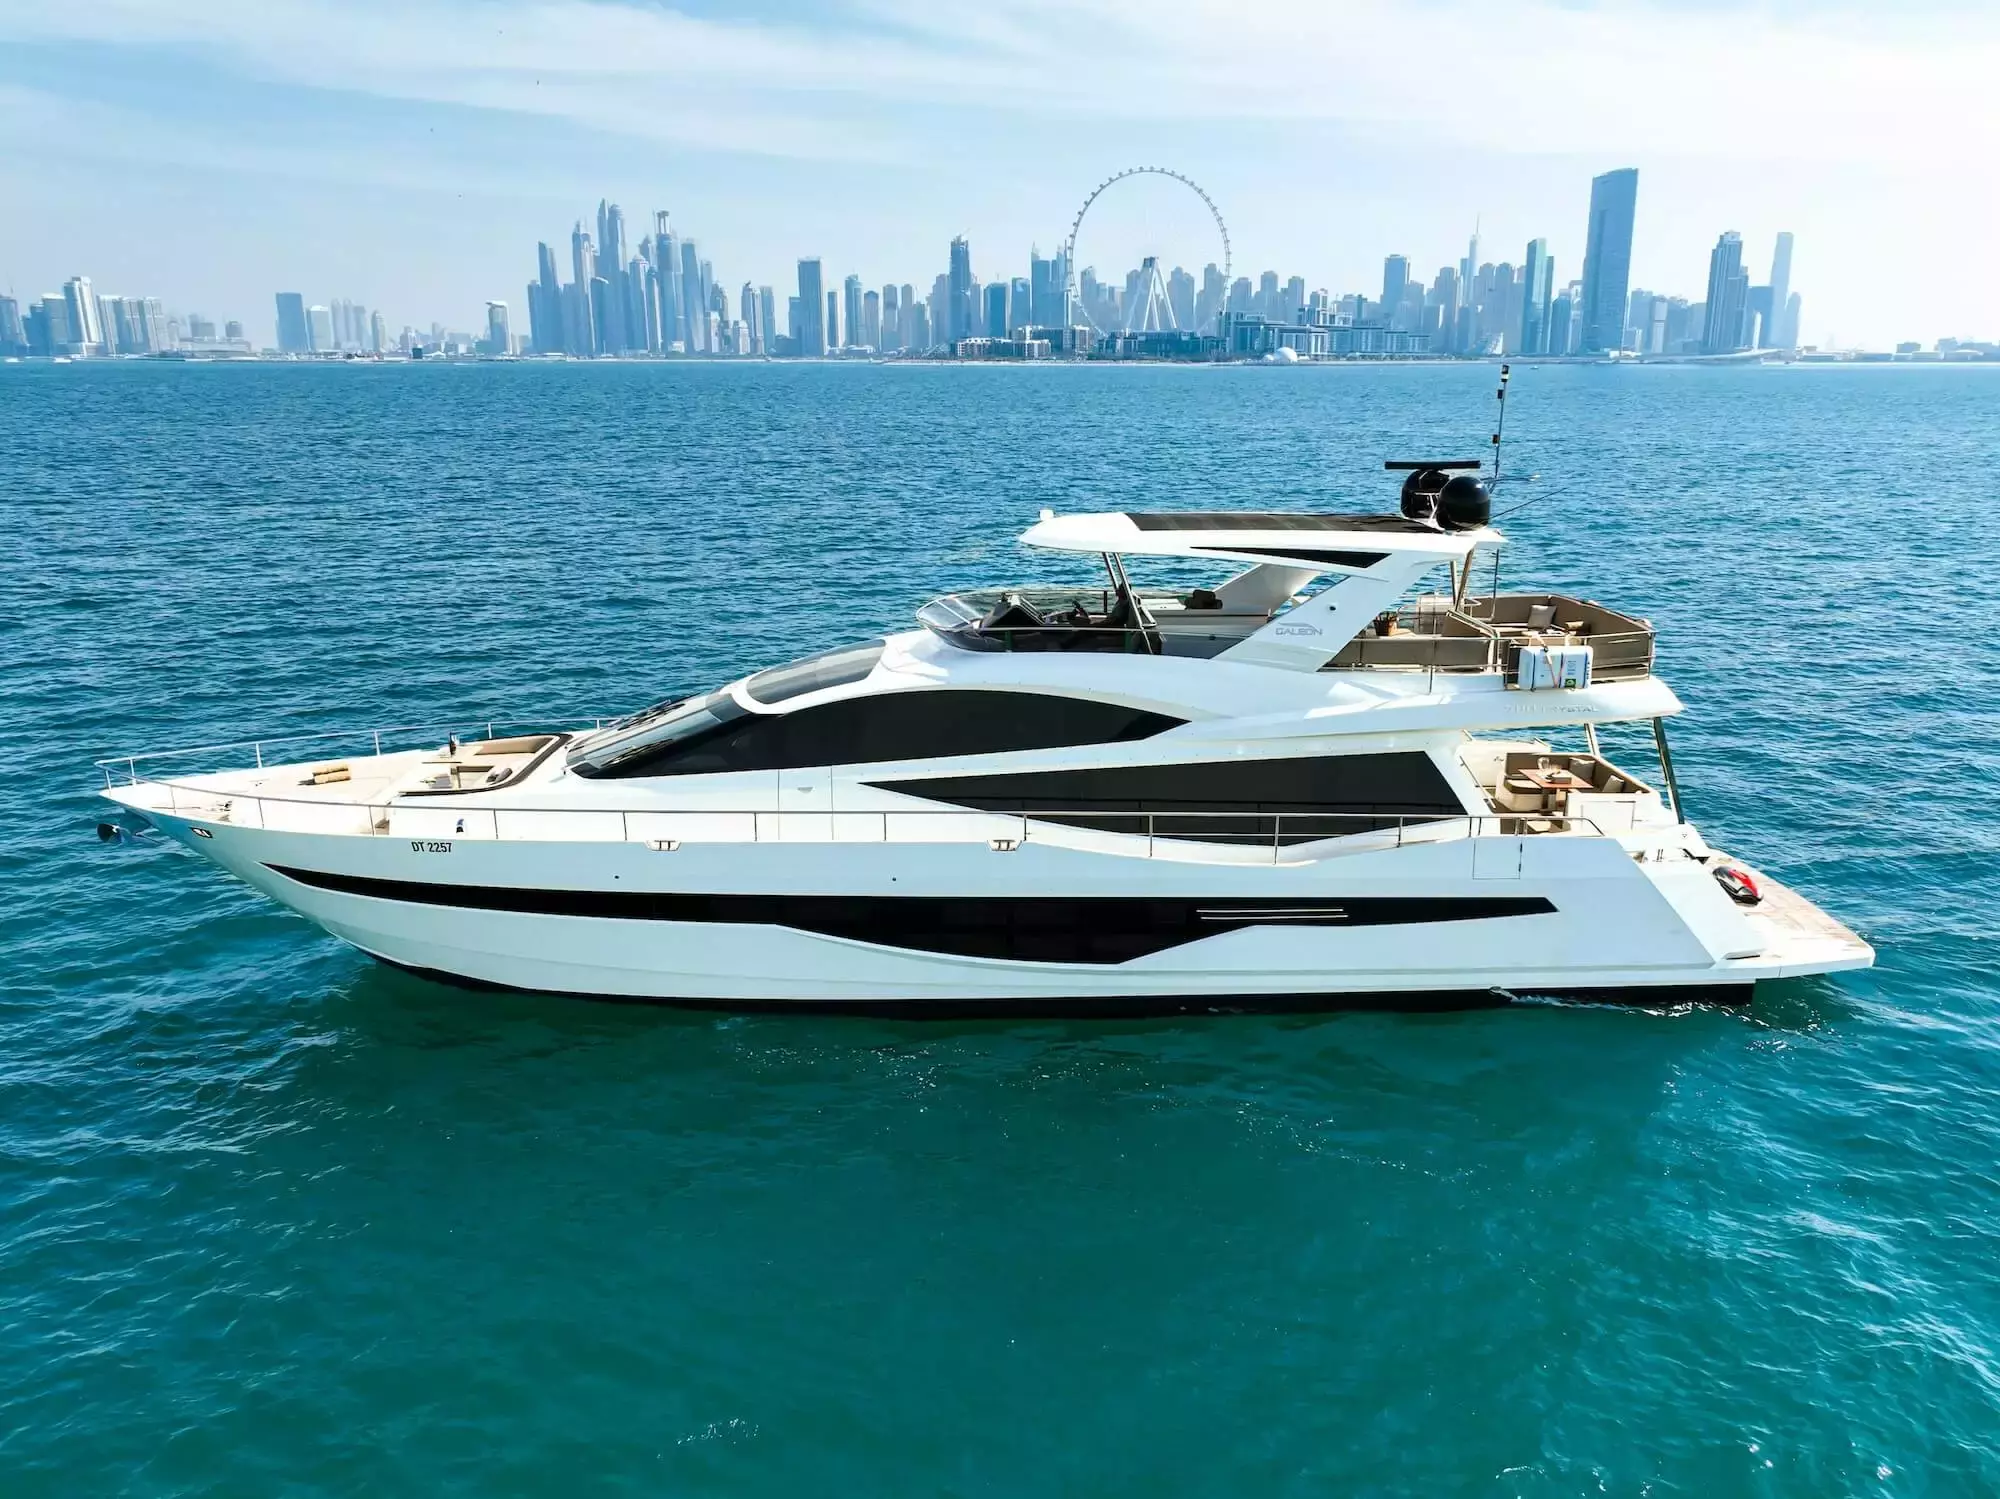 French by Galeon - Top rates for a Charter of a private Motor Yacht in Bahrain